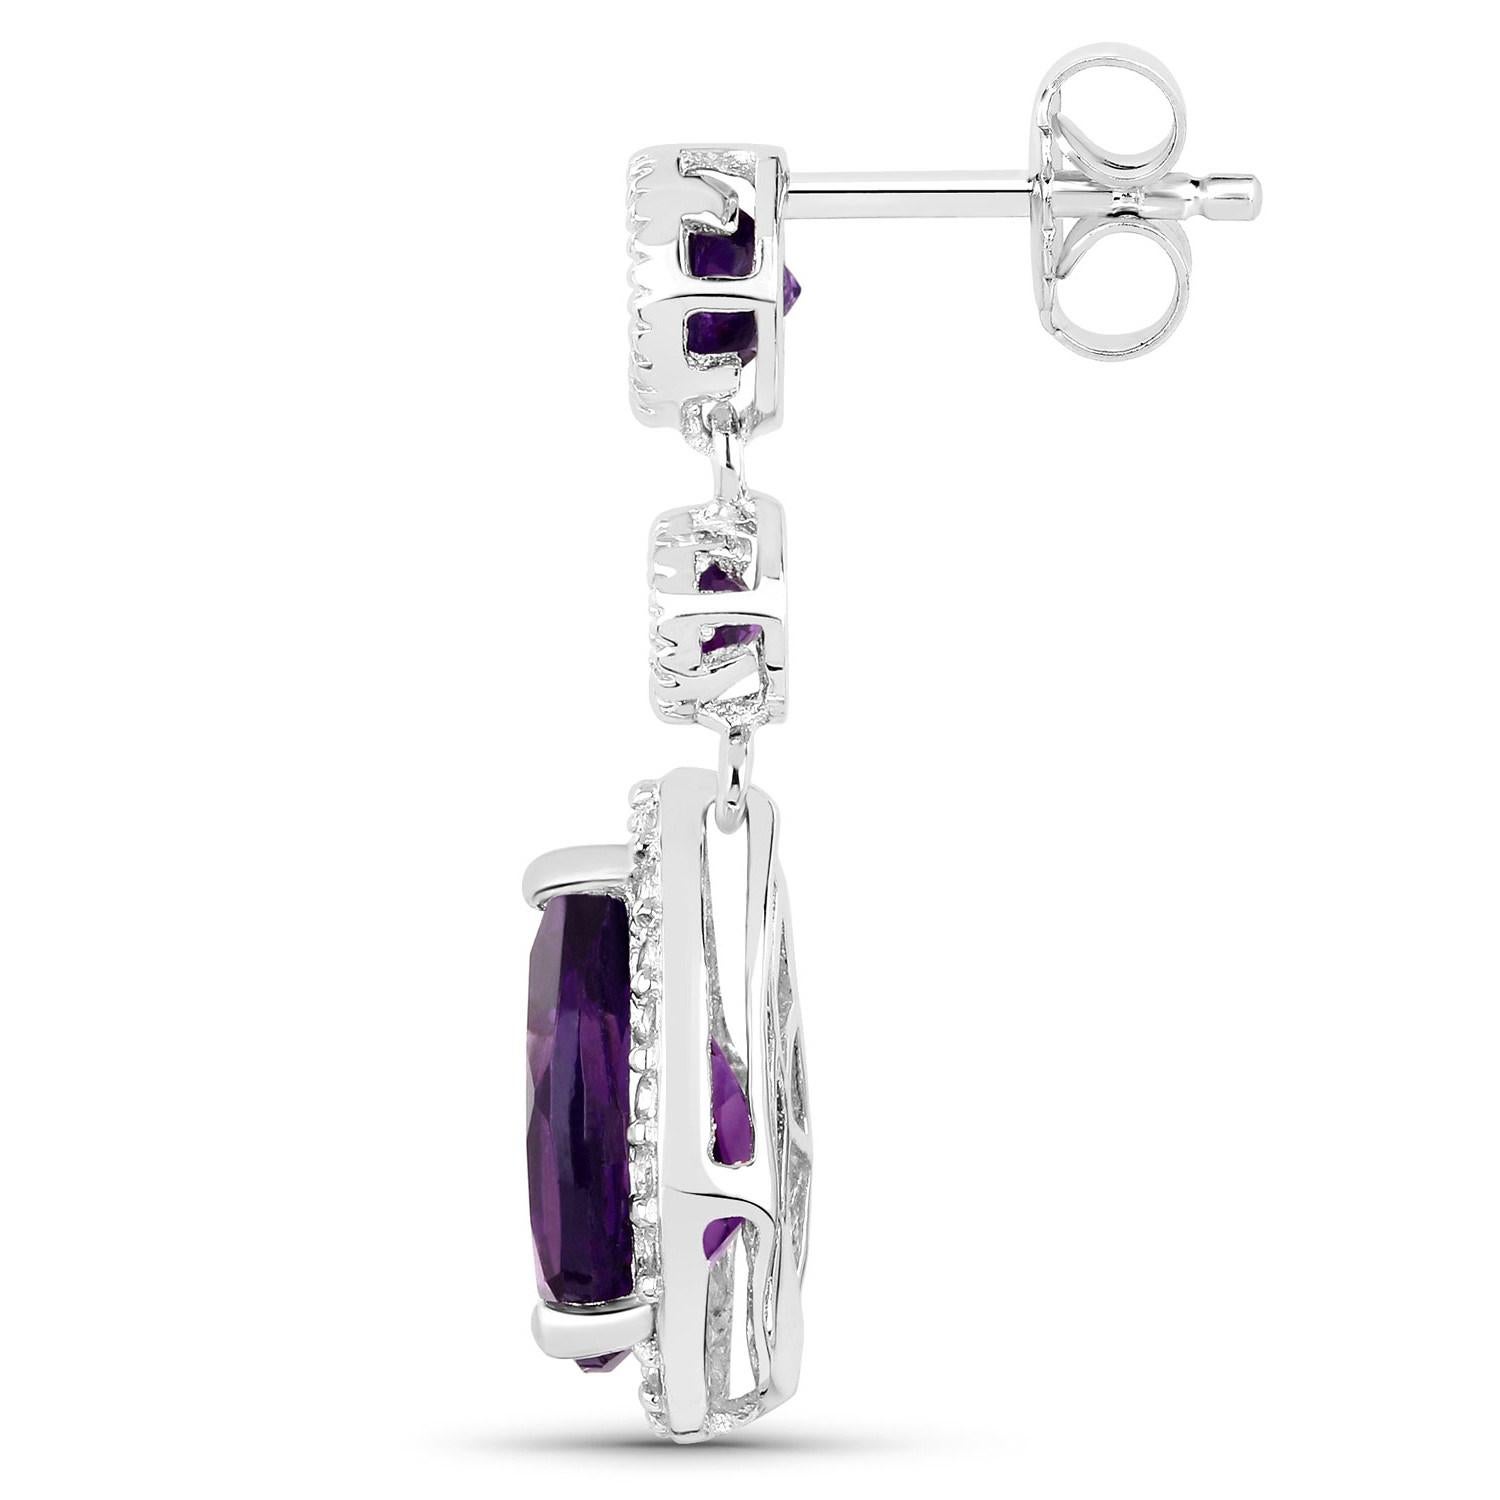 Women's Massive 7 Carats Amethyst and White Topaz Dangle Earrings 18k White Gold Plated For Sale